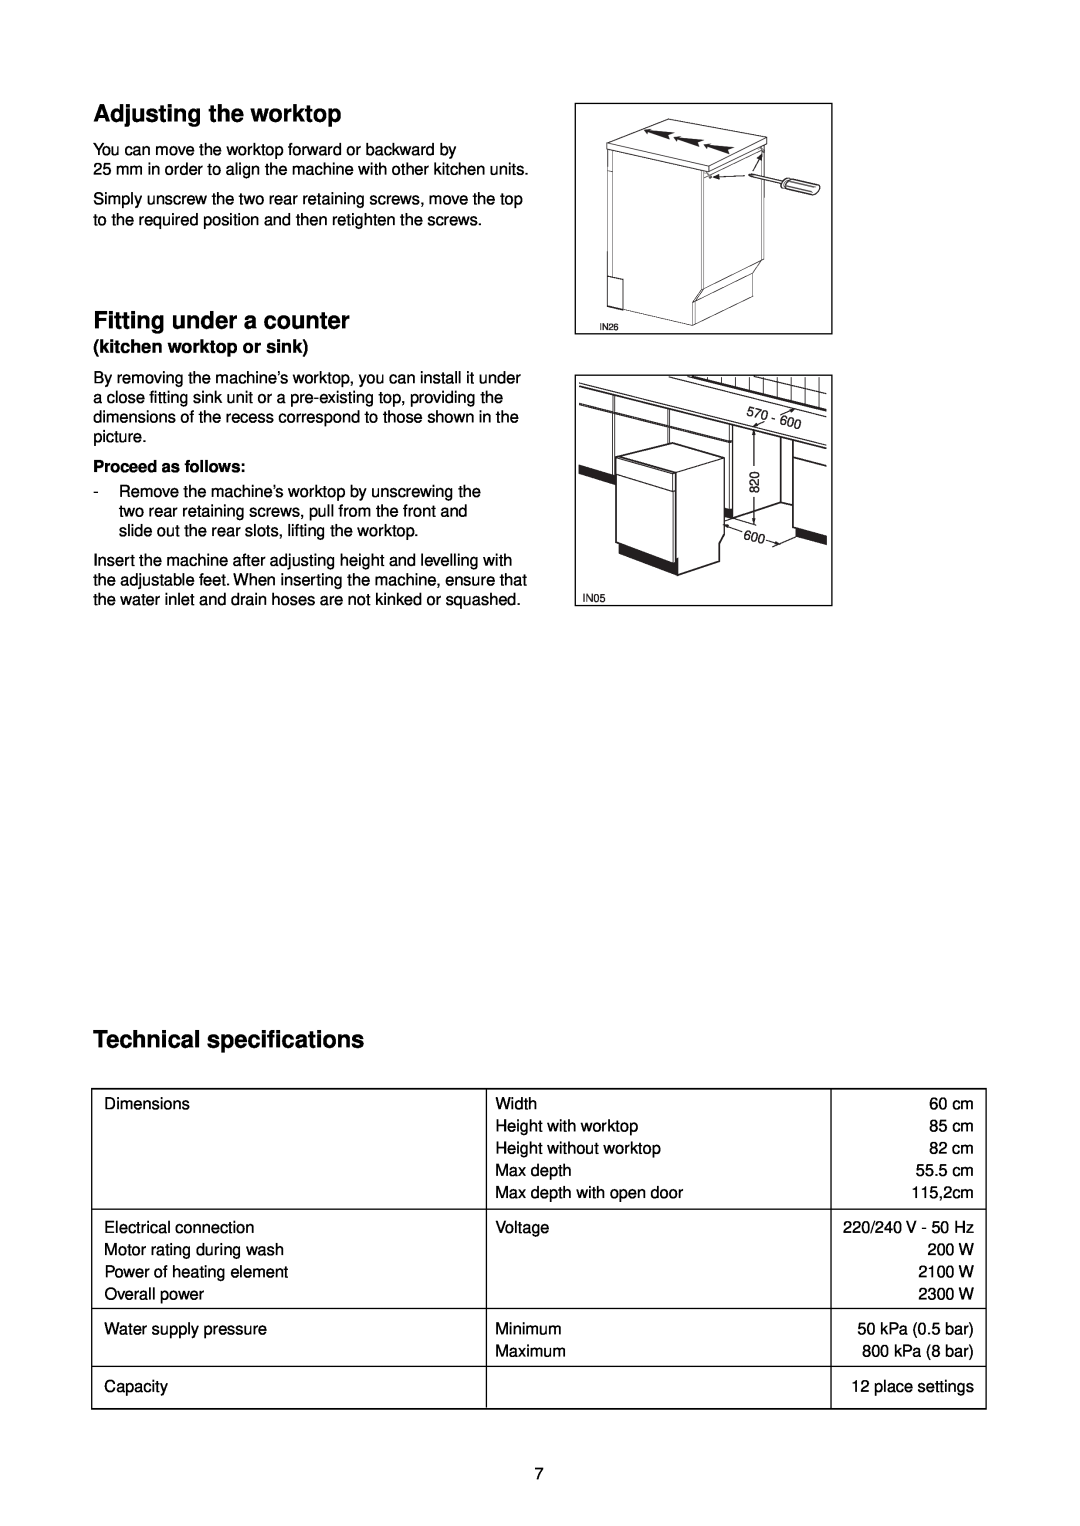 Tricity Bendix CDW 101 Adjusting the worktop, Fitting under a counter, Technical specifications, kitchen worktop or sink 